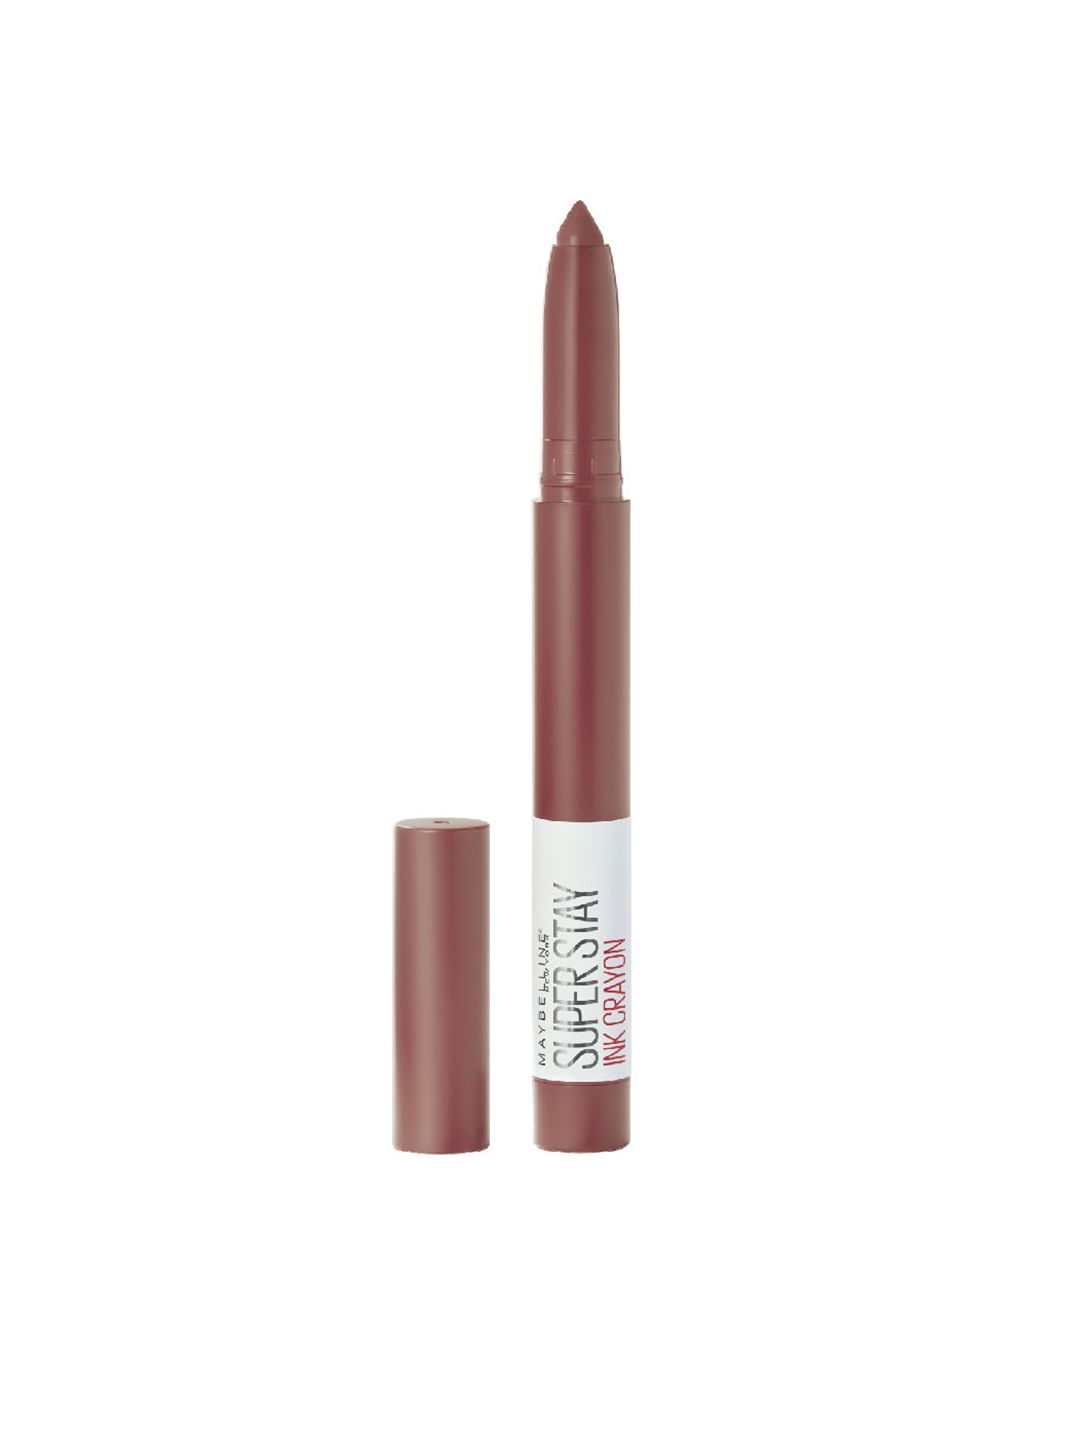 Maybelline New York SuperStay Matte Ink Crayon Lipstick - Enjoy The View 20 Price in India